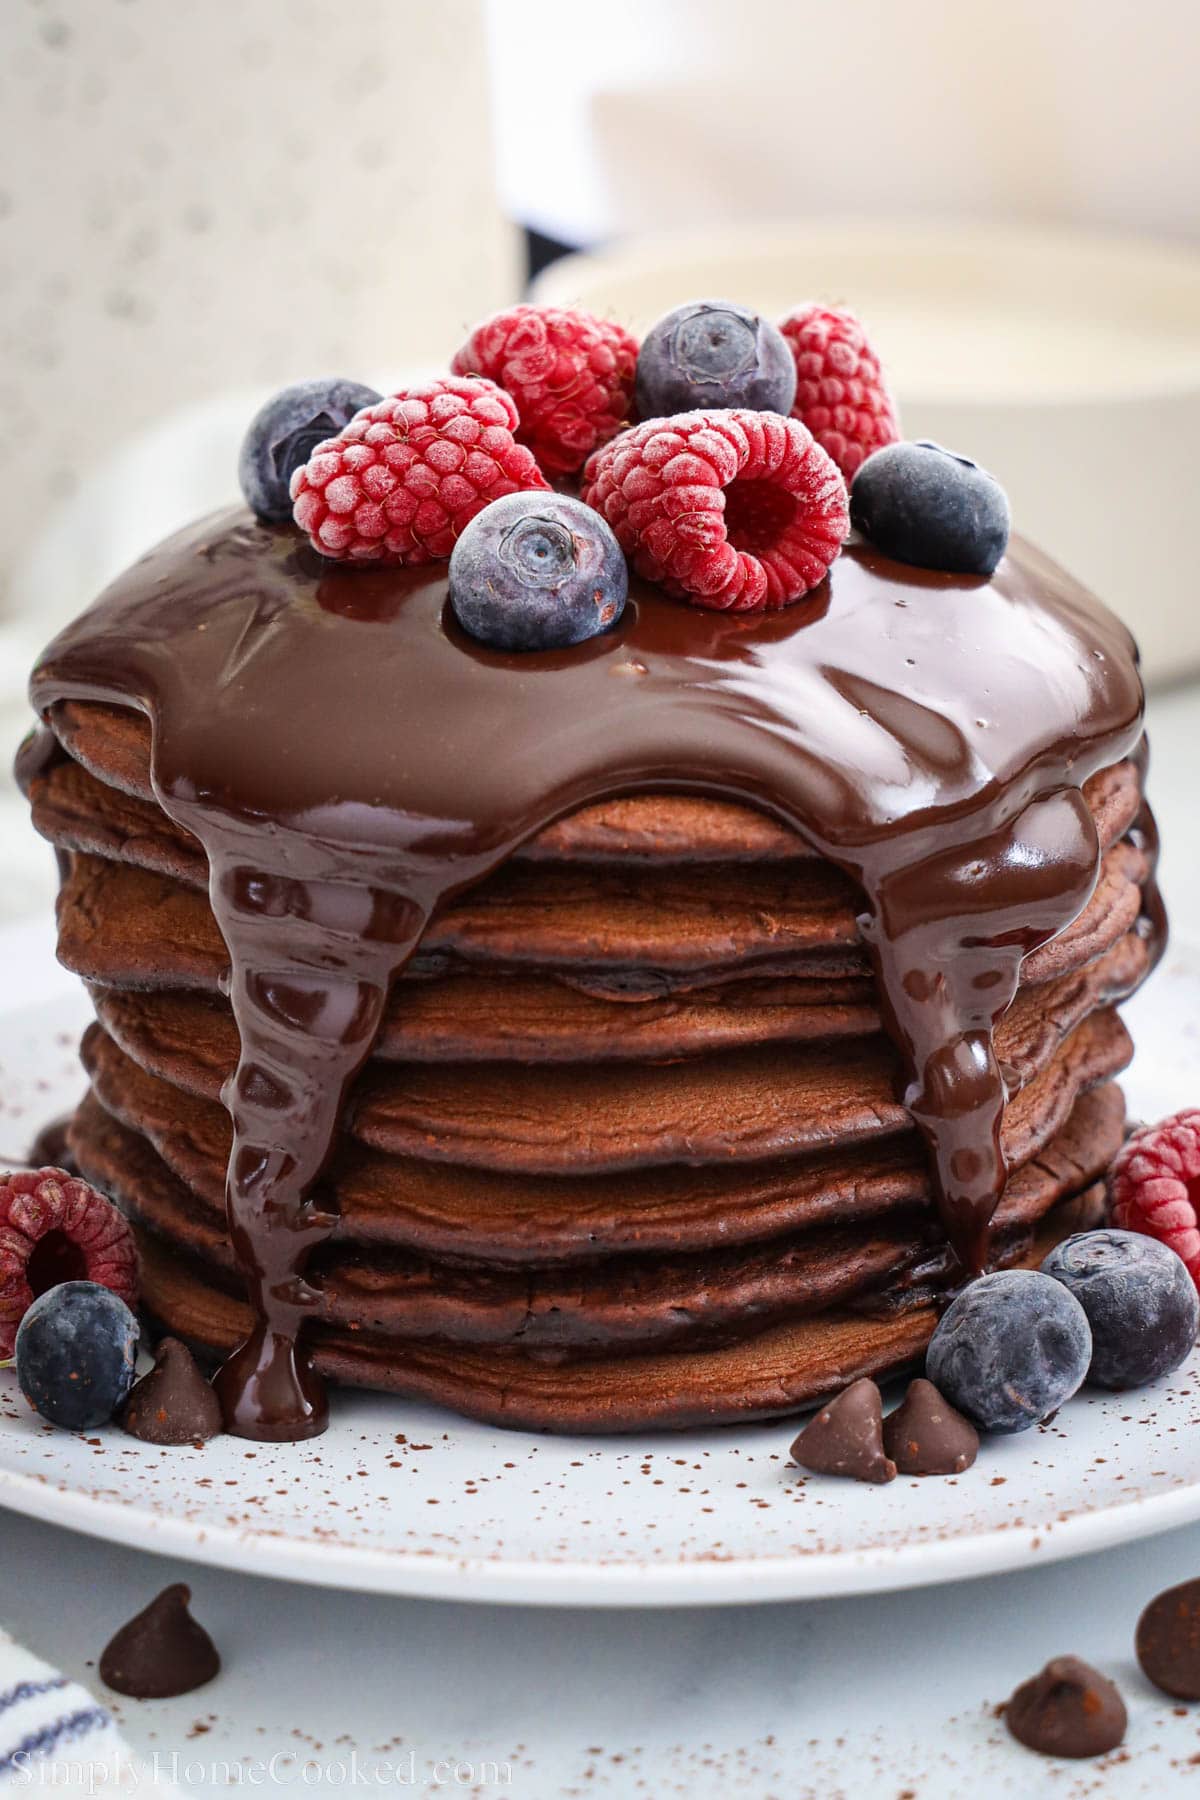 Stack of Chocolate Pancakes topped with chocolate ganache and berries.